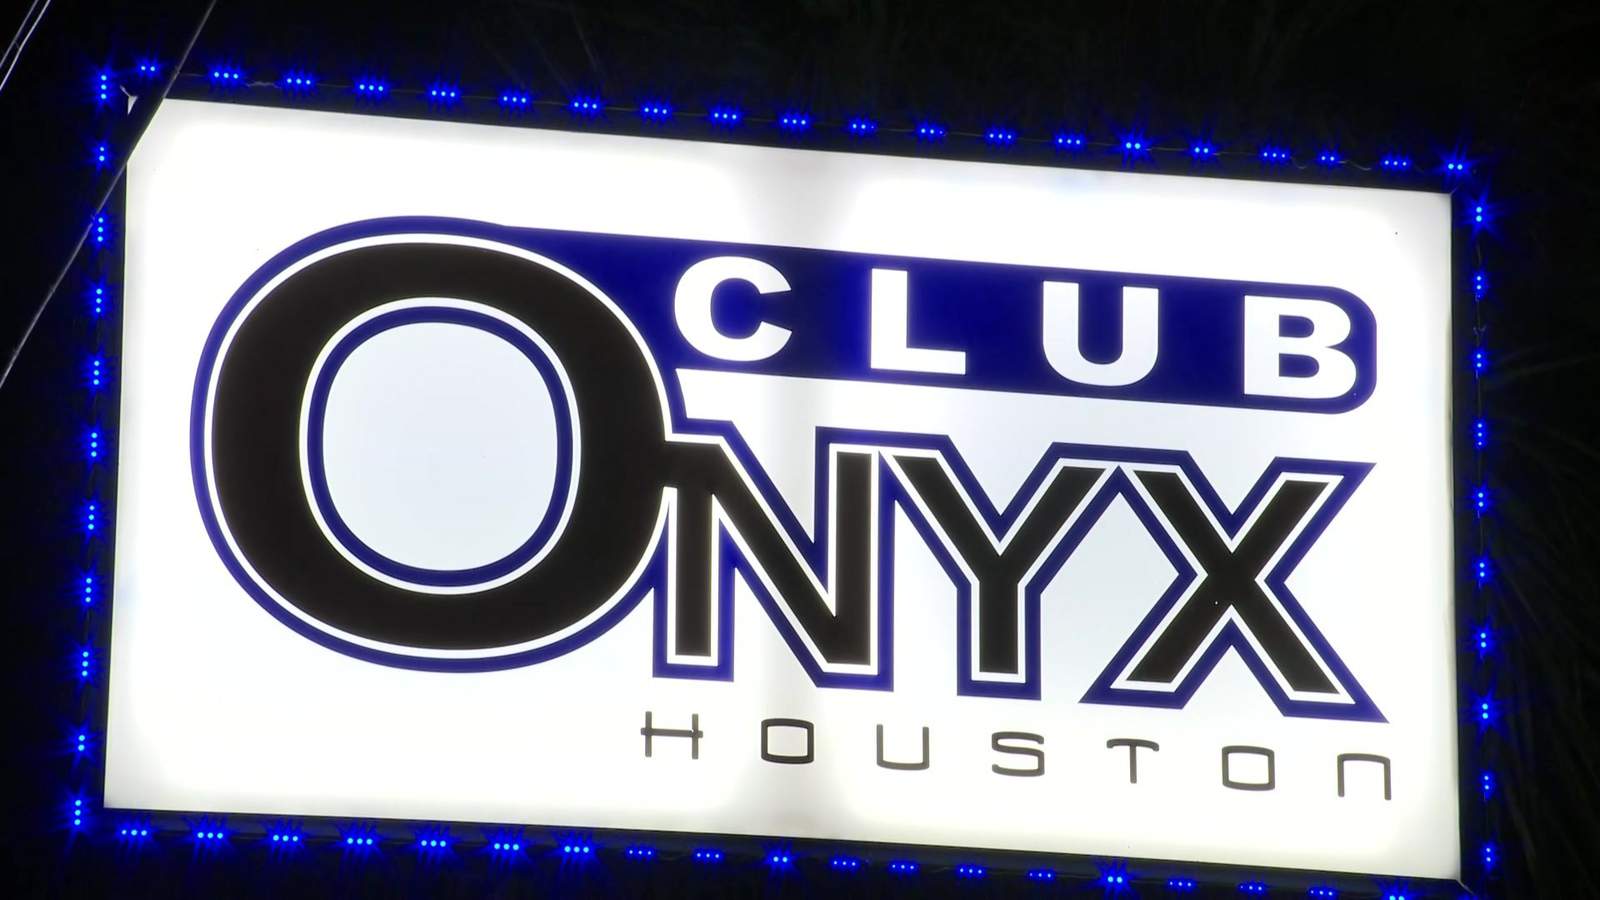 Federal judge rules Club Onyx may only operate as restaurant without ‘entertainers’